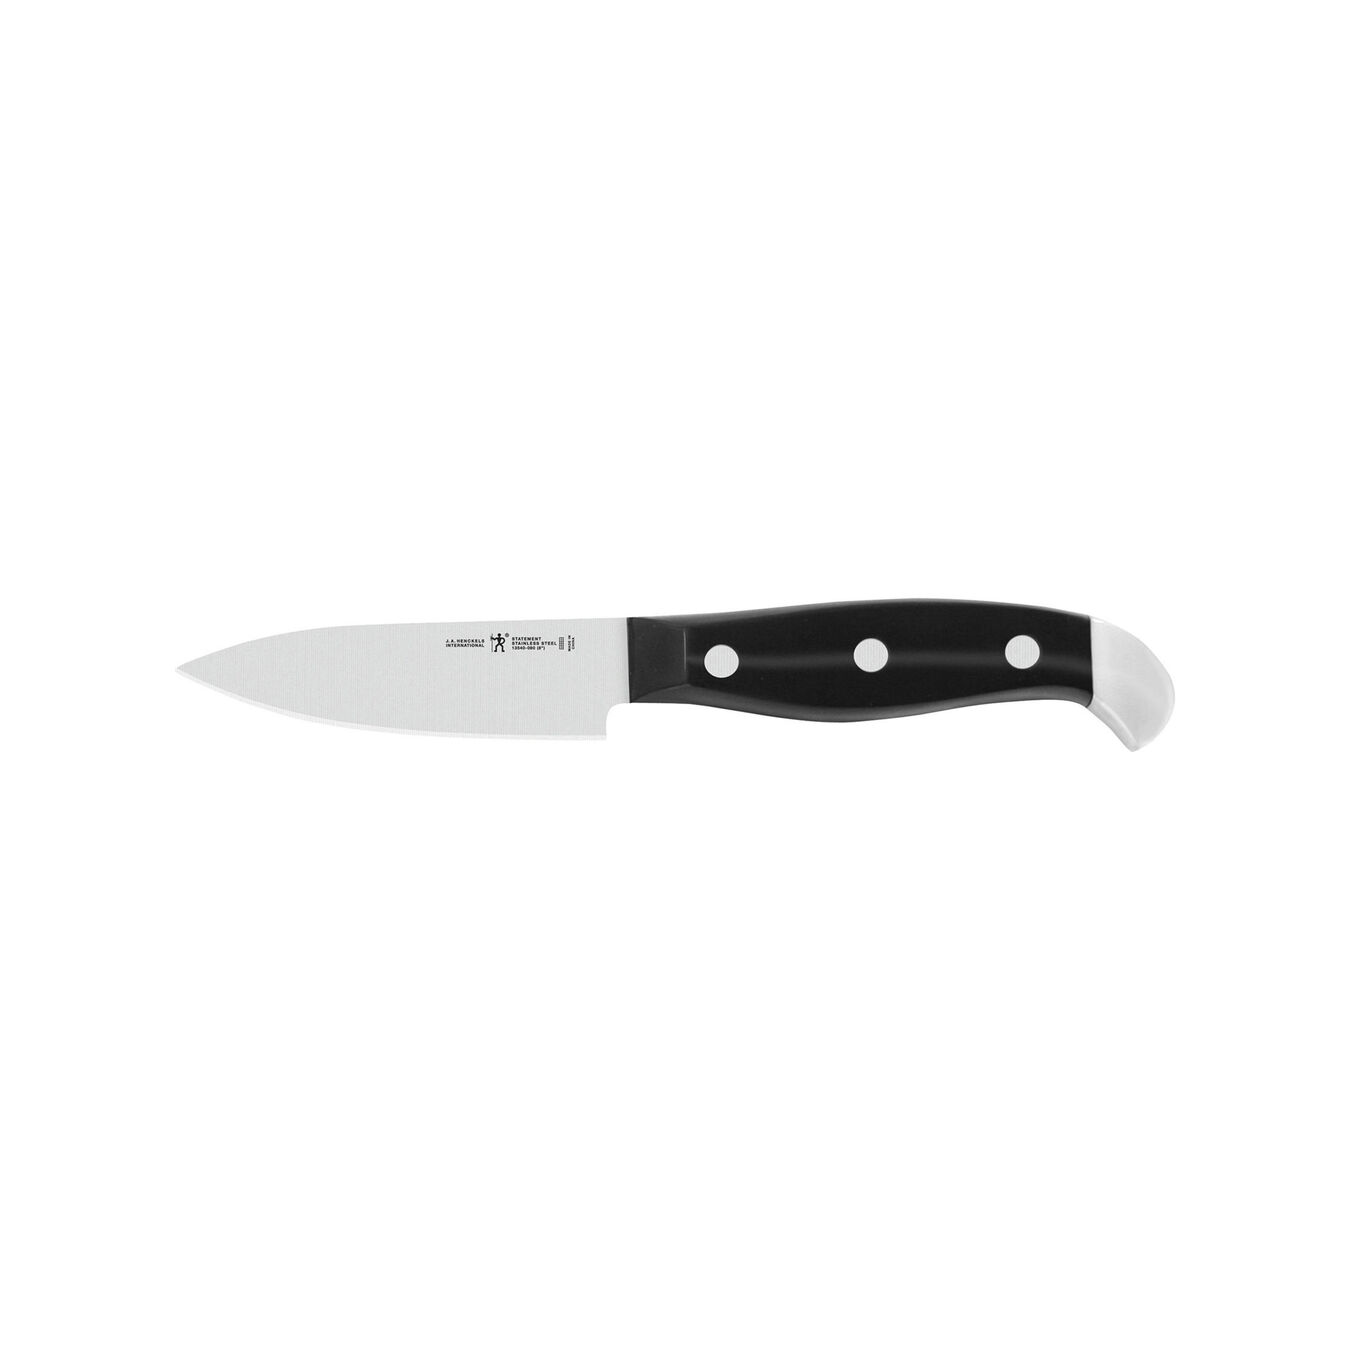 3-inch, Paring knife,,large 1